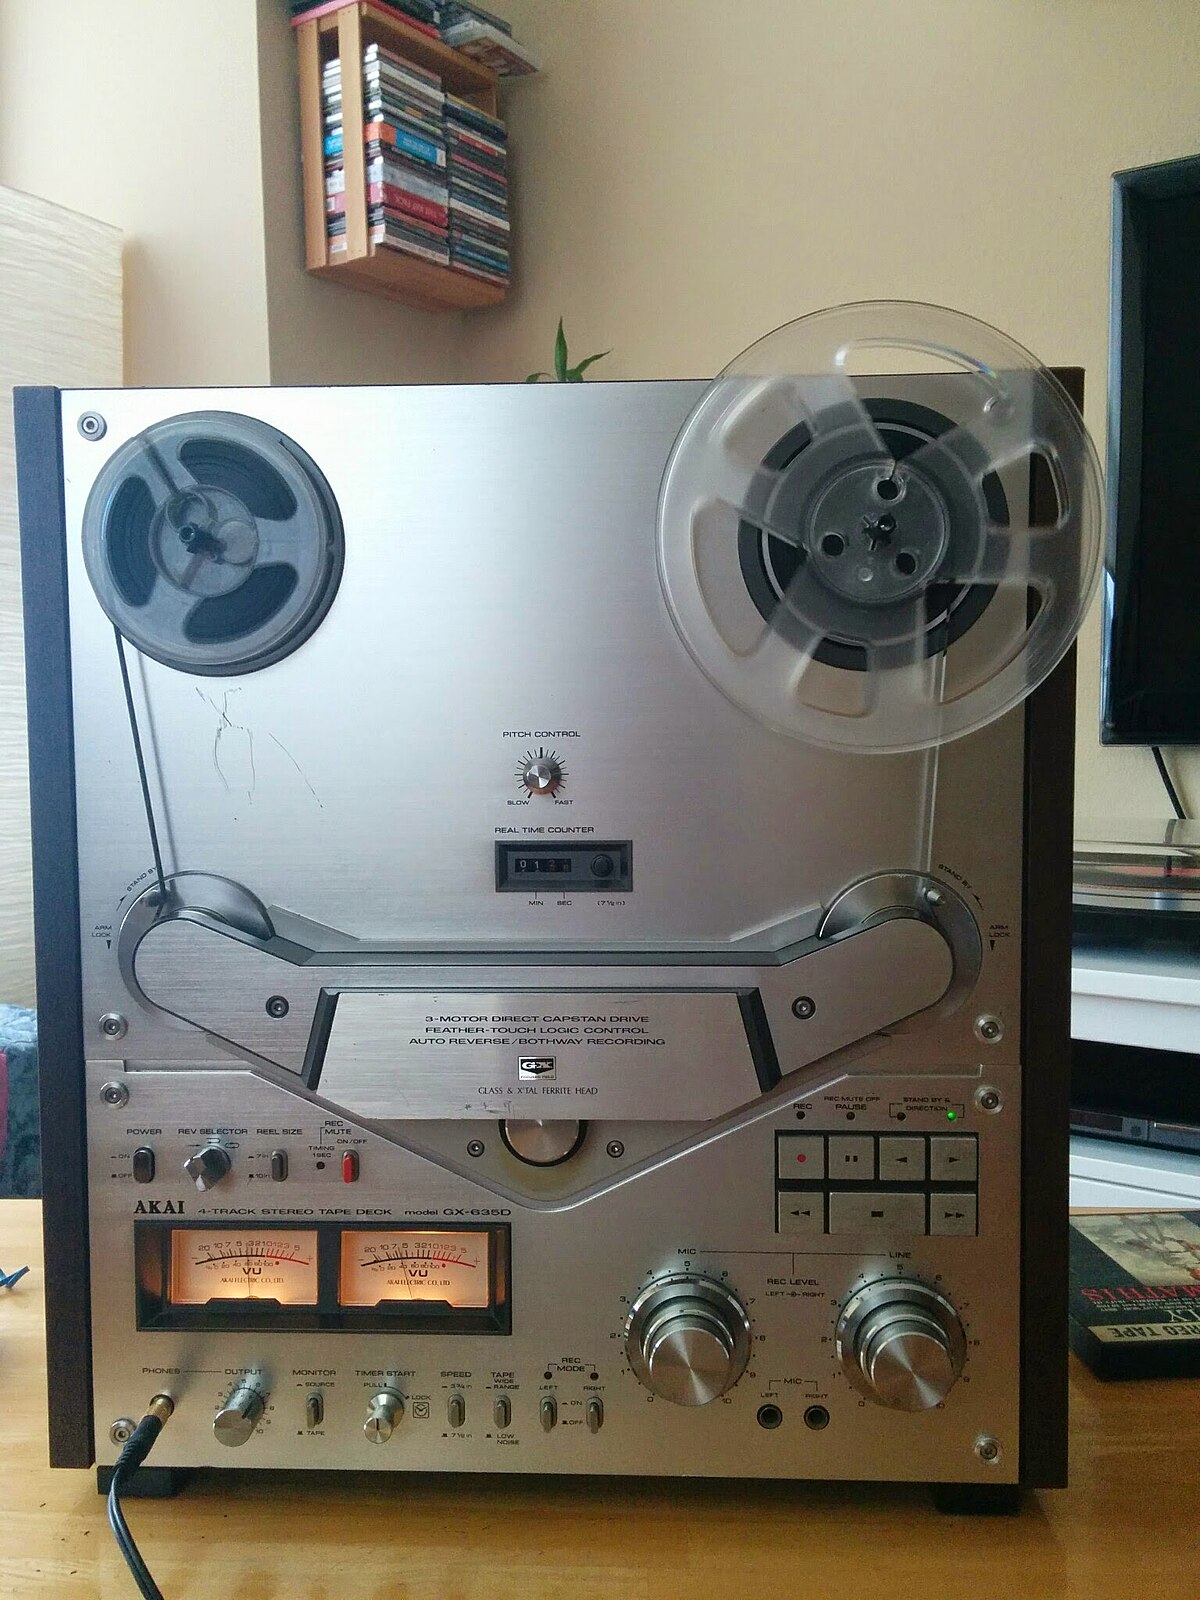 File:Before-and-after comparison of photo retouche on image of Akai GX-635D  reel-to-reel tape recorder.jpg - Wikimedia Commons